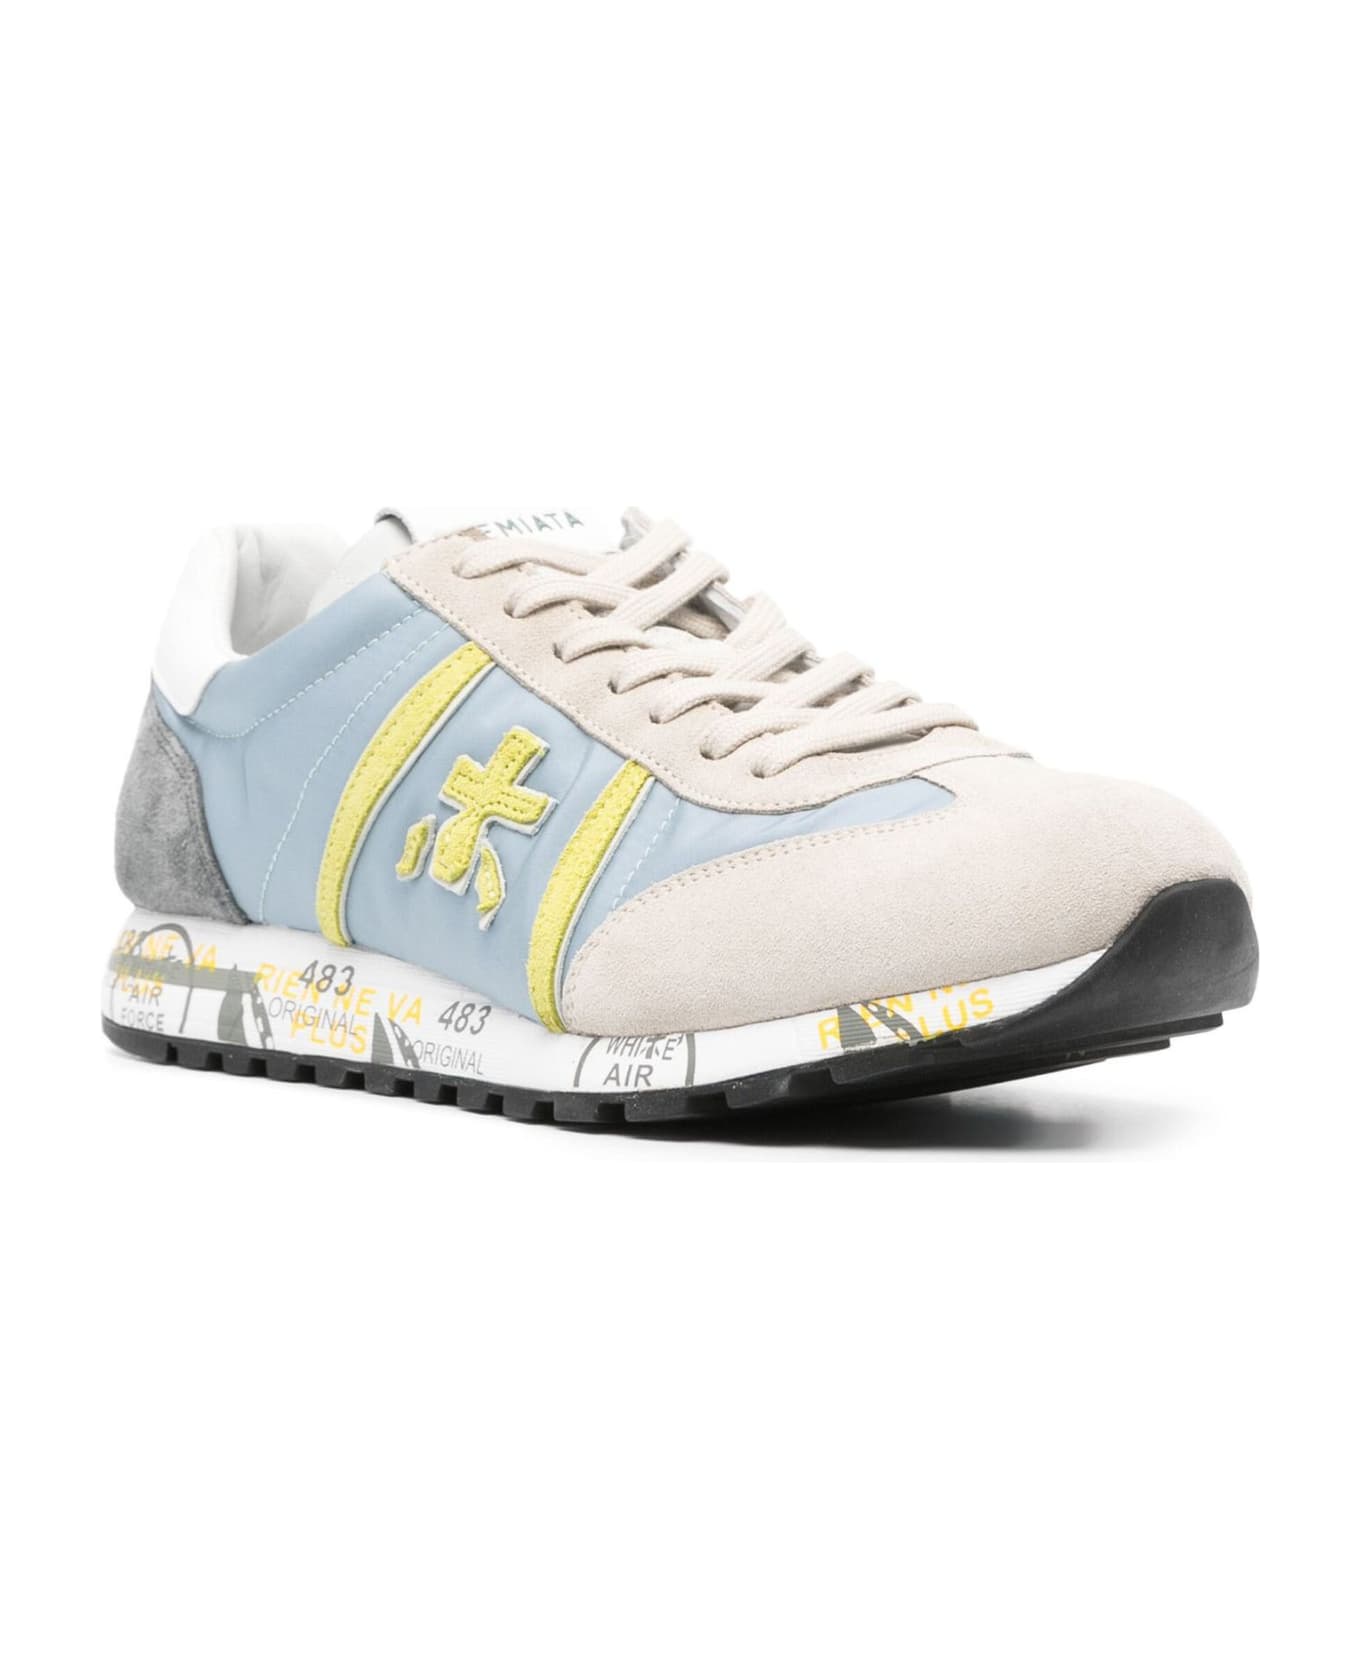 Premiata Lucy 6619 Beige And Blue Sneakers - Beige スニーカー